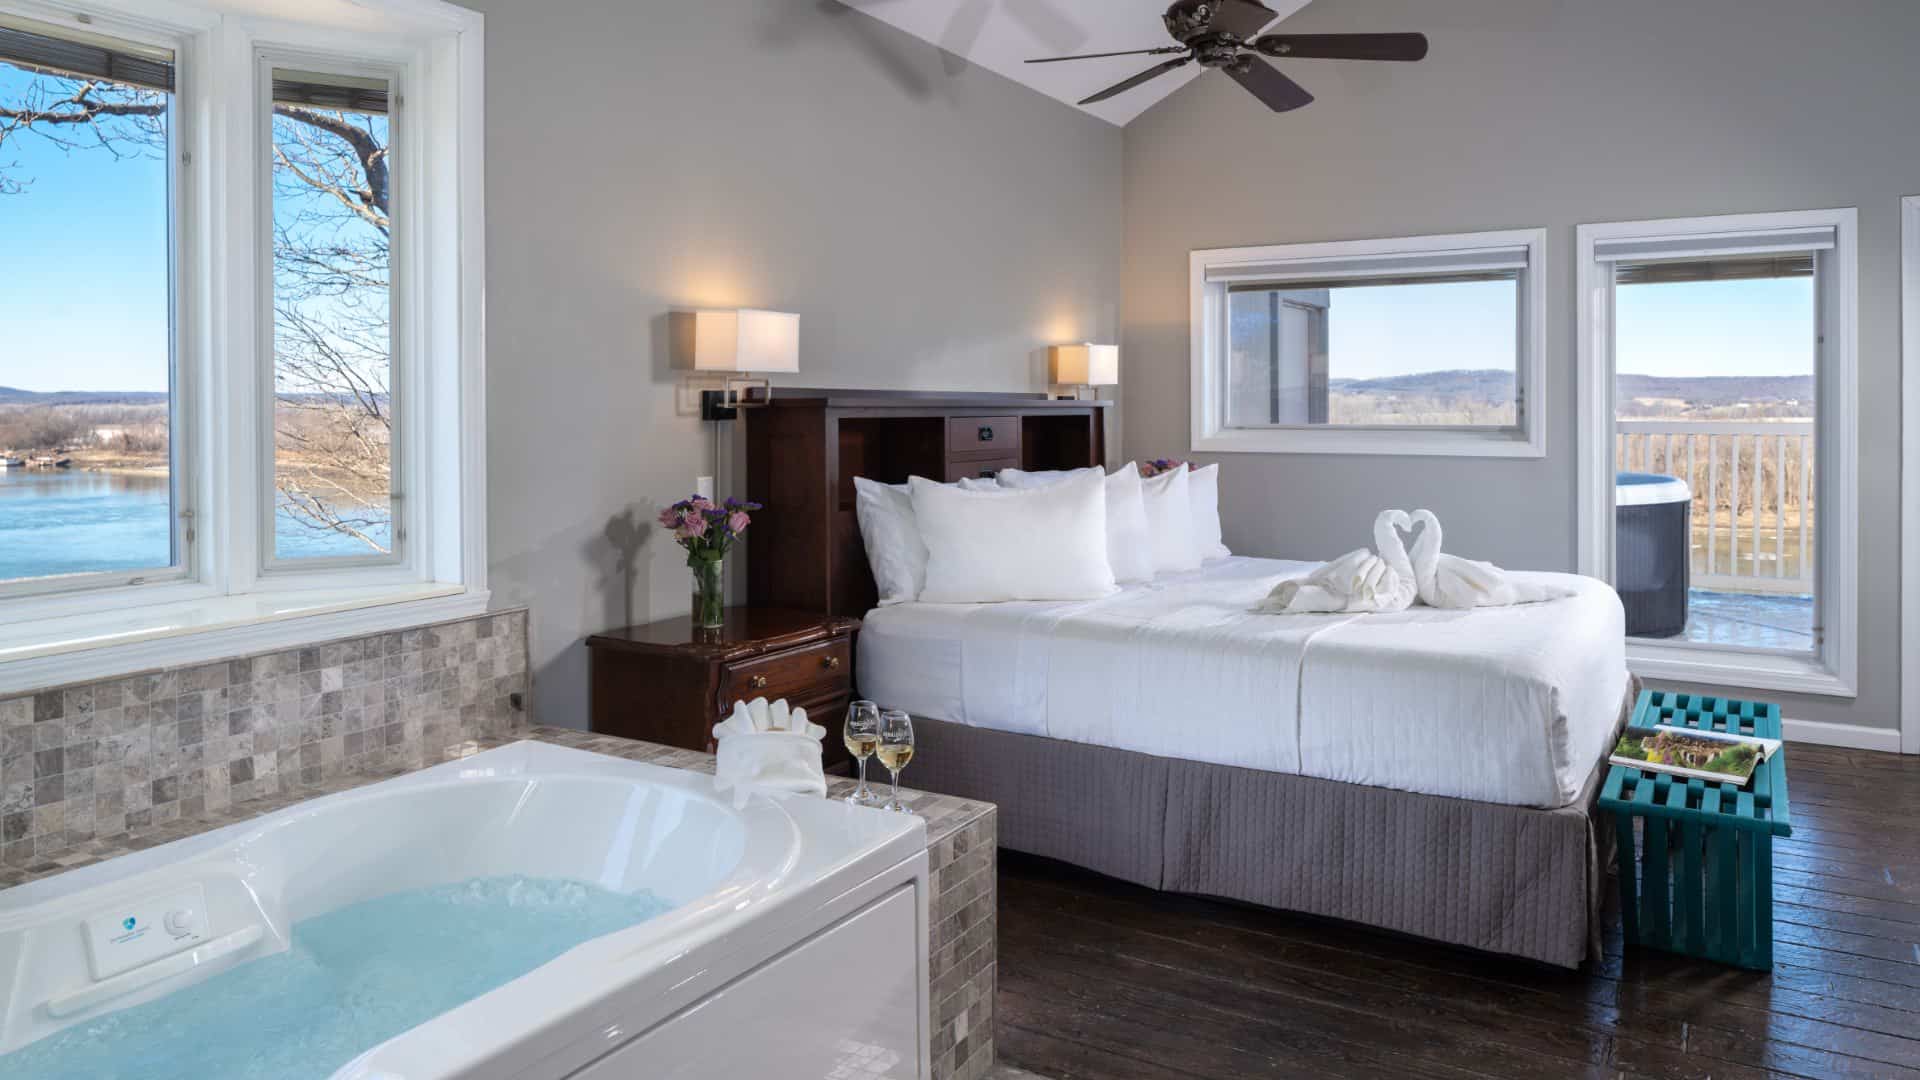 Large bedroom suite with light gray walls, tiled flooring, wooden headboard, white bedding, gray comforter, and jetted tub